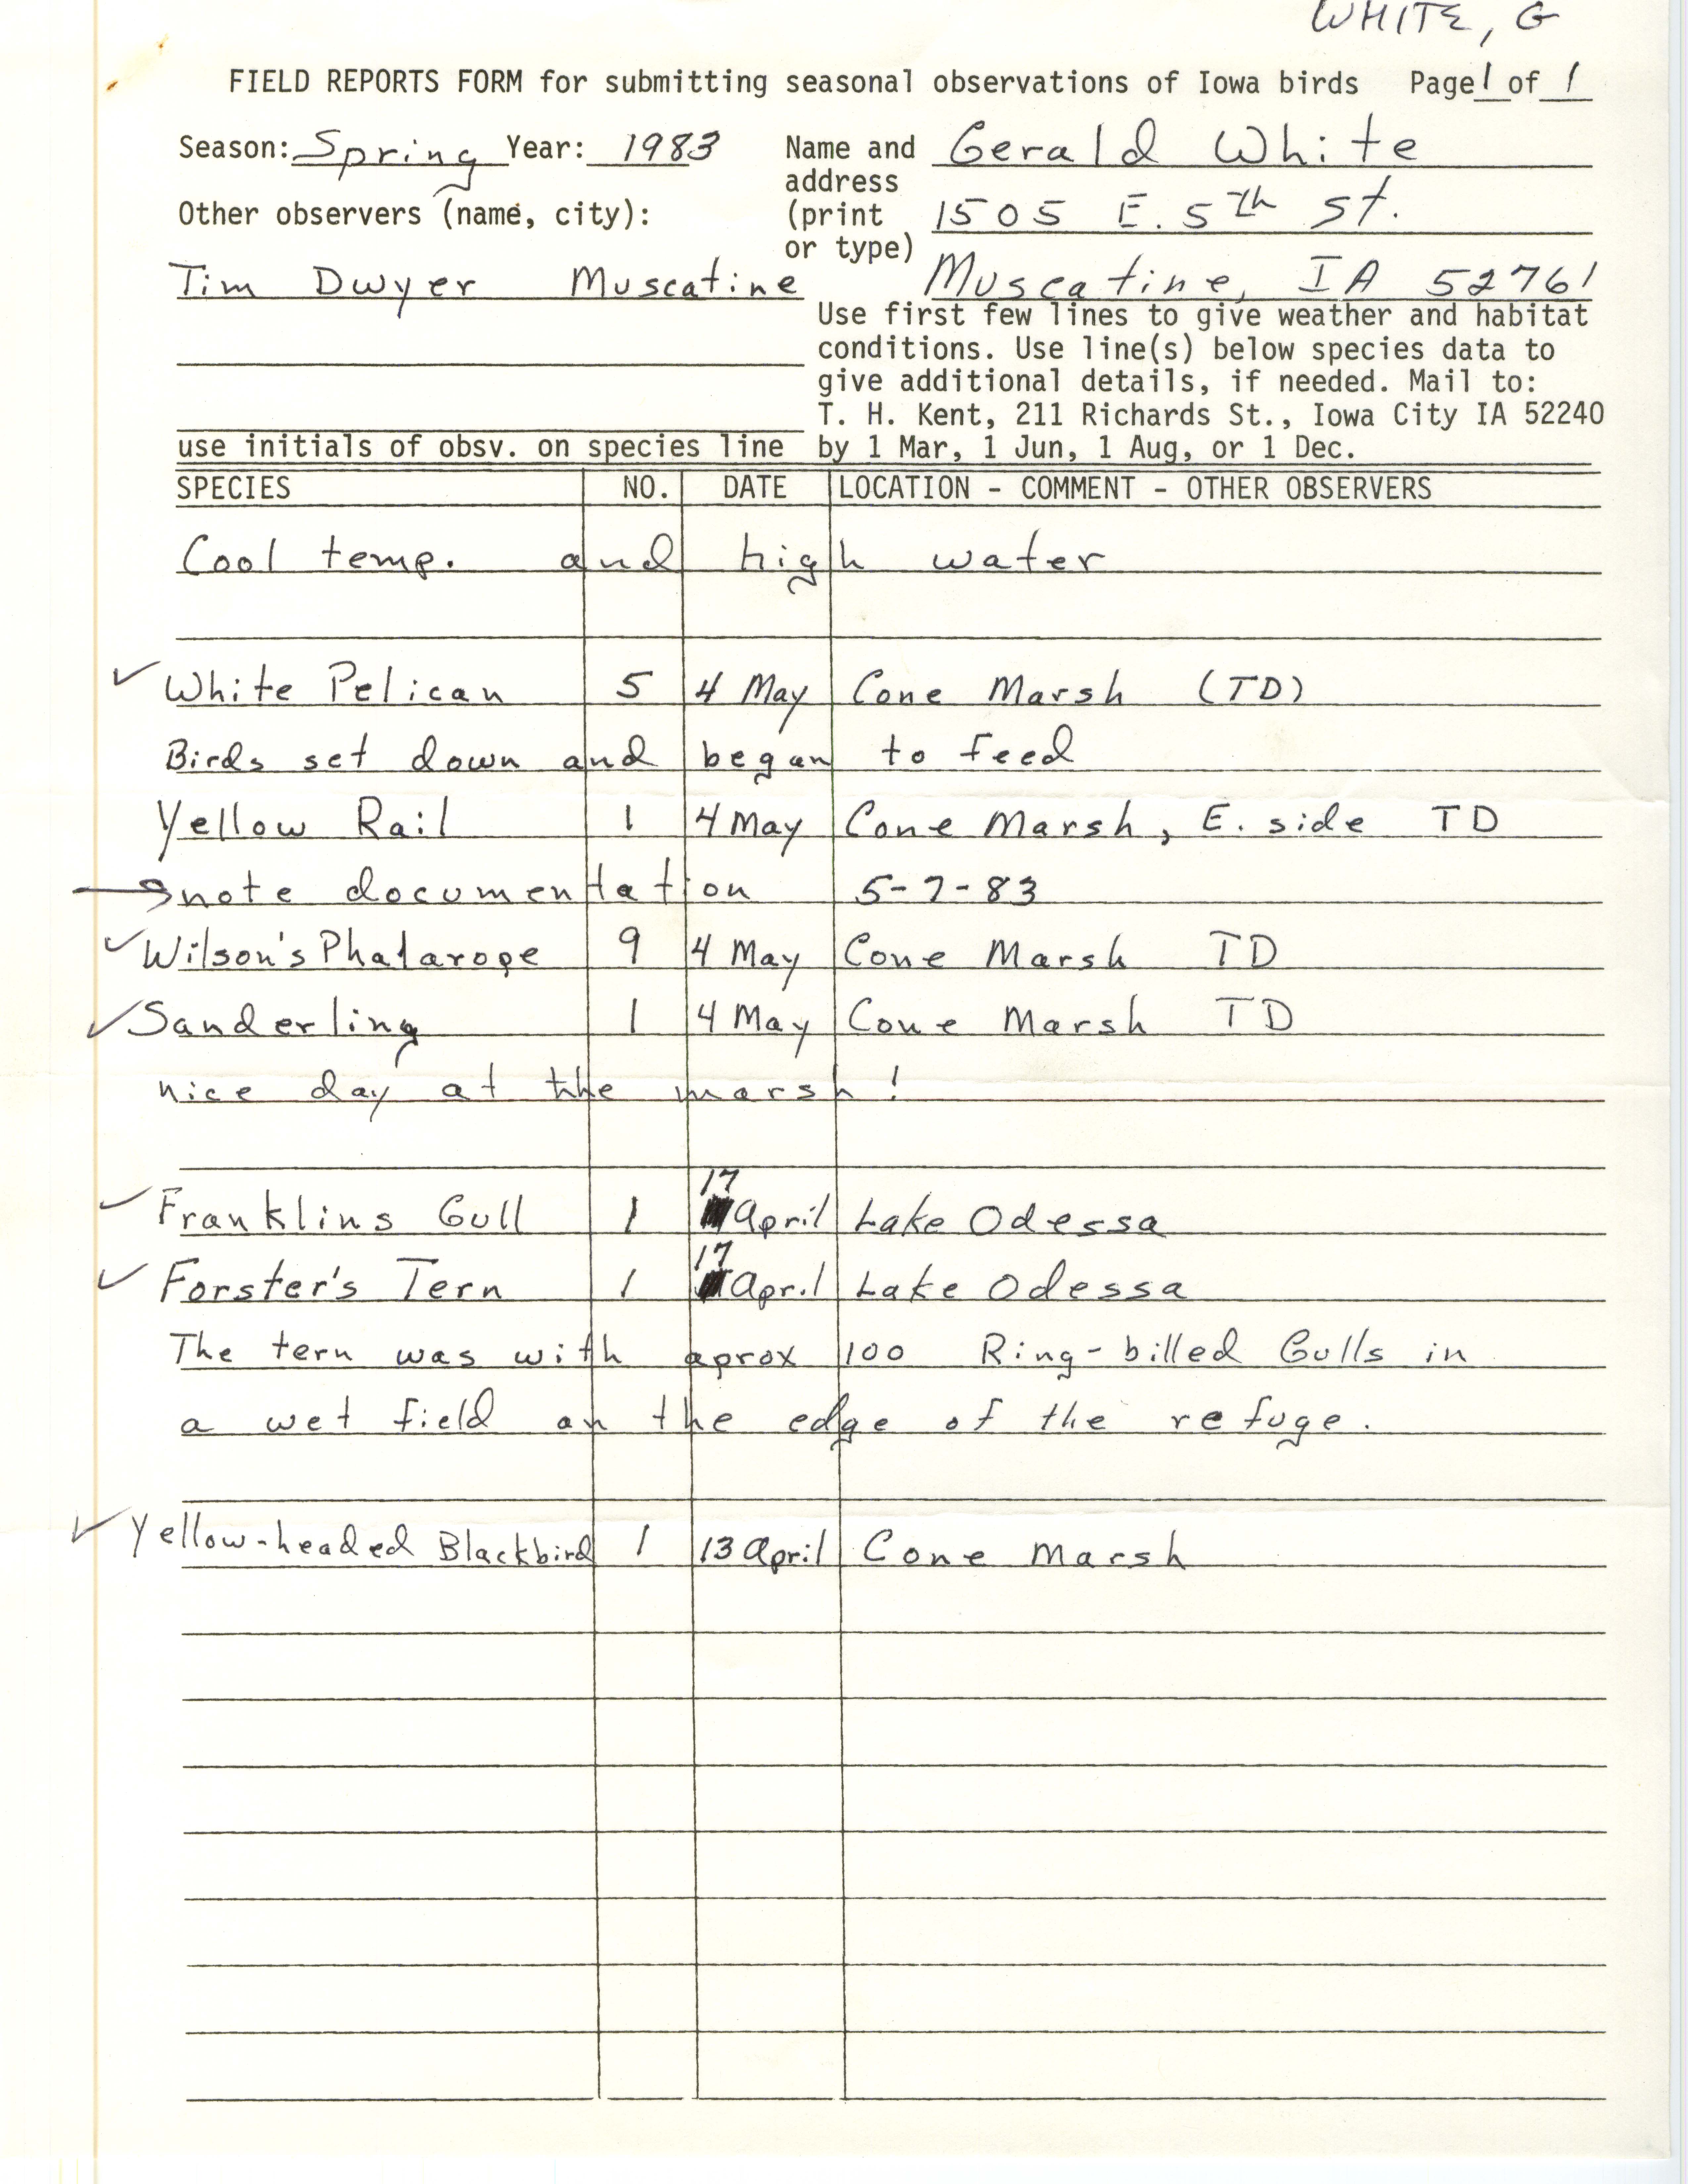 Field reports form for submitting seasonal observations of Iowa birds, Gerald White, spring 1983